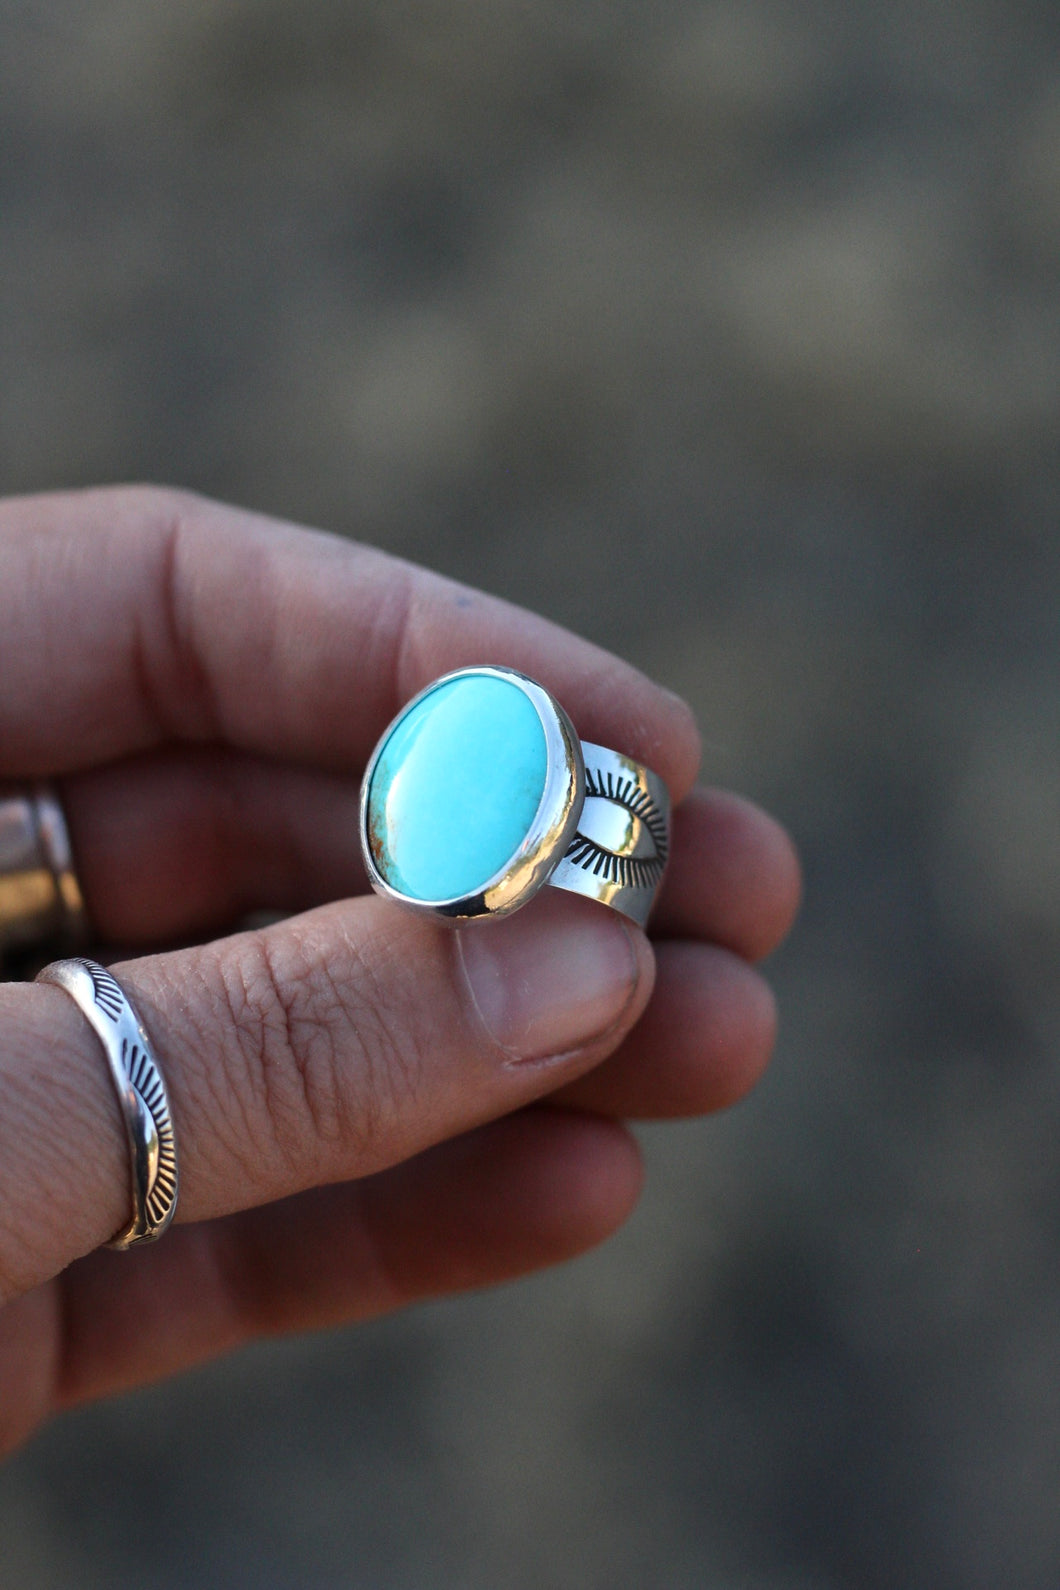 Turquoise ring - size 5.75